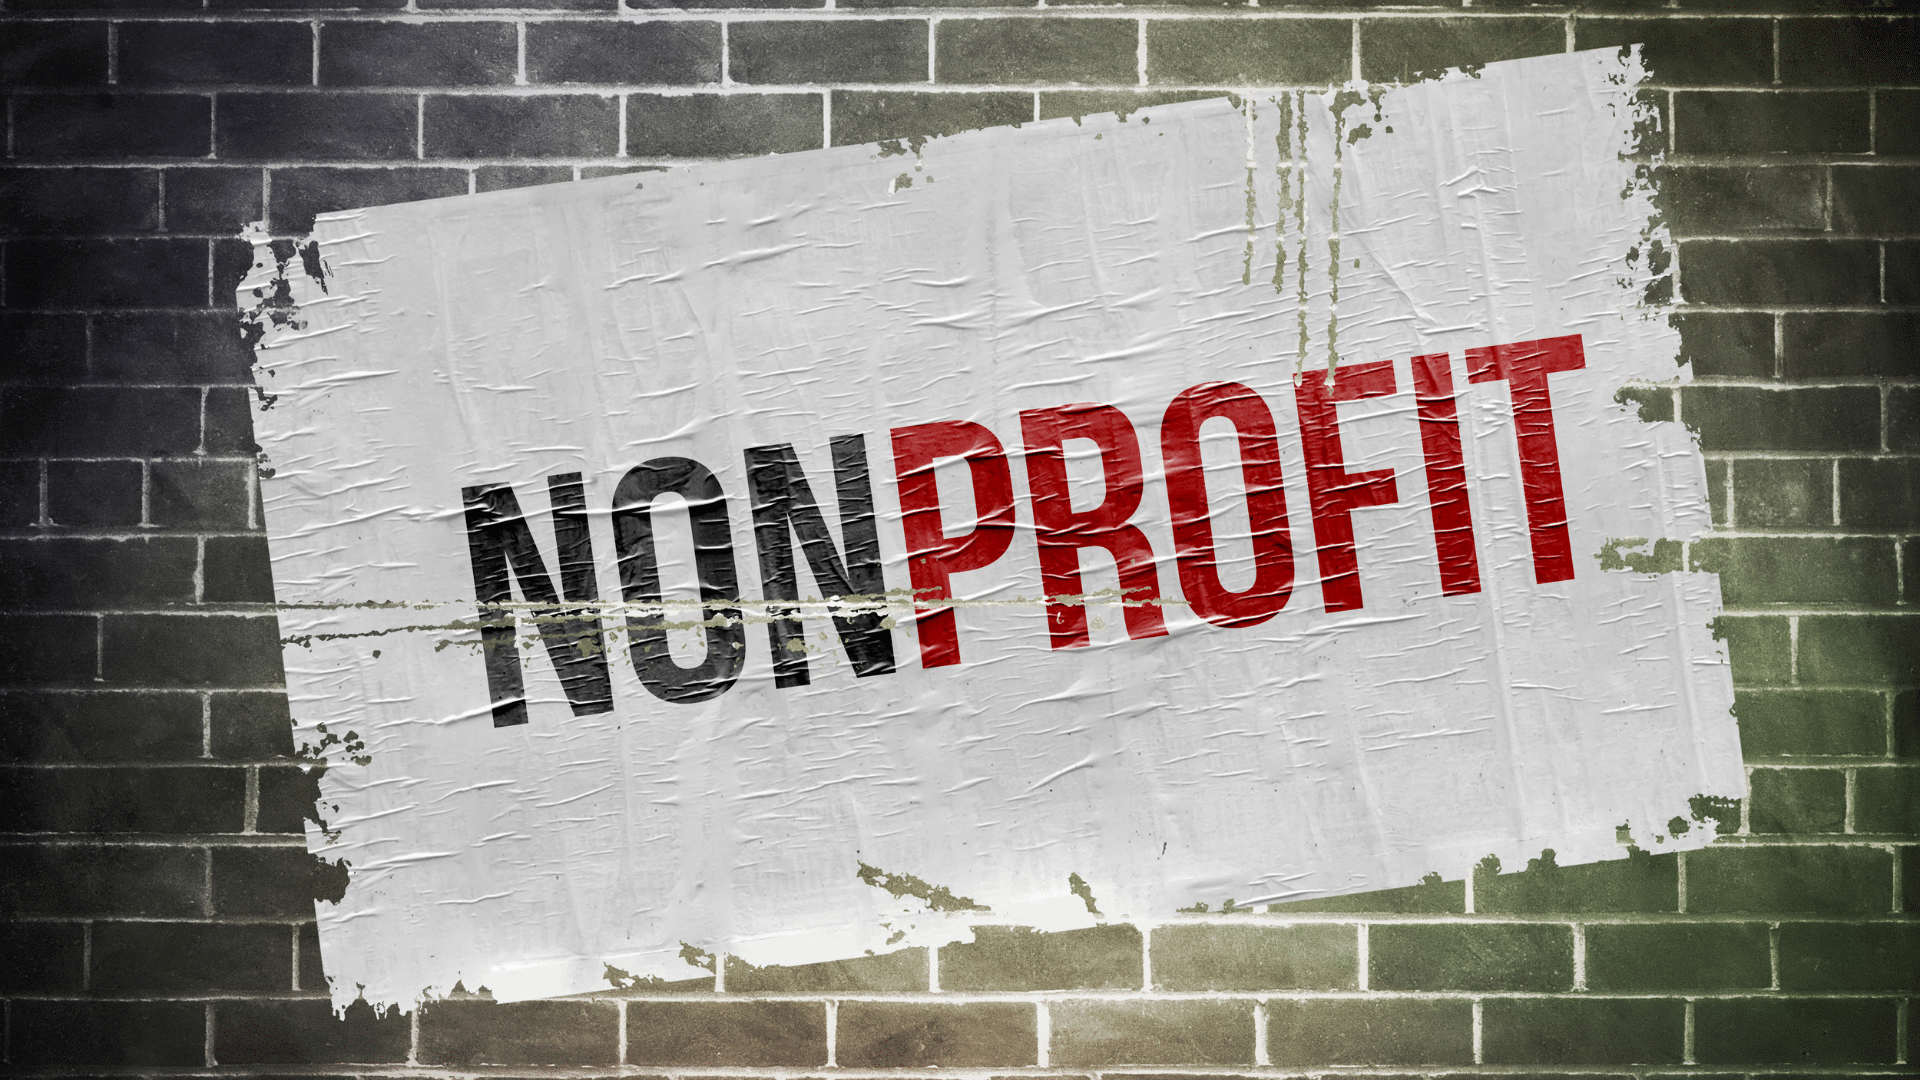 A white piece of paper has been slapped onto a brick wall at a slight diagonal slant, with the word "NONPROFIT" written in bold, all-caps across the paper.